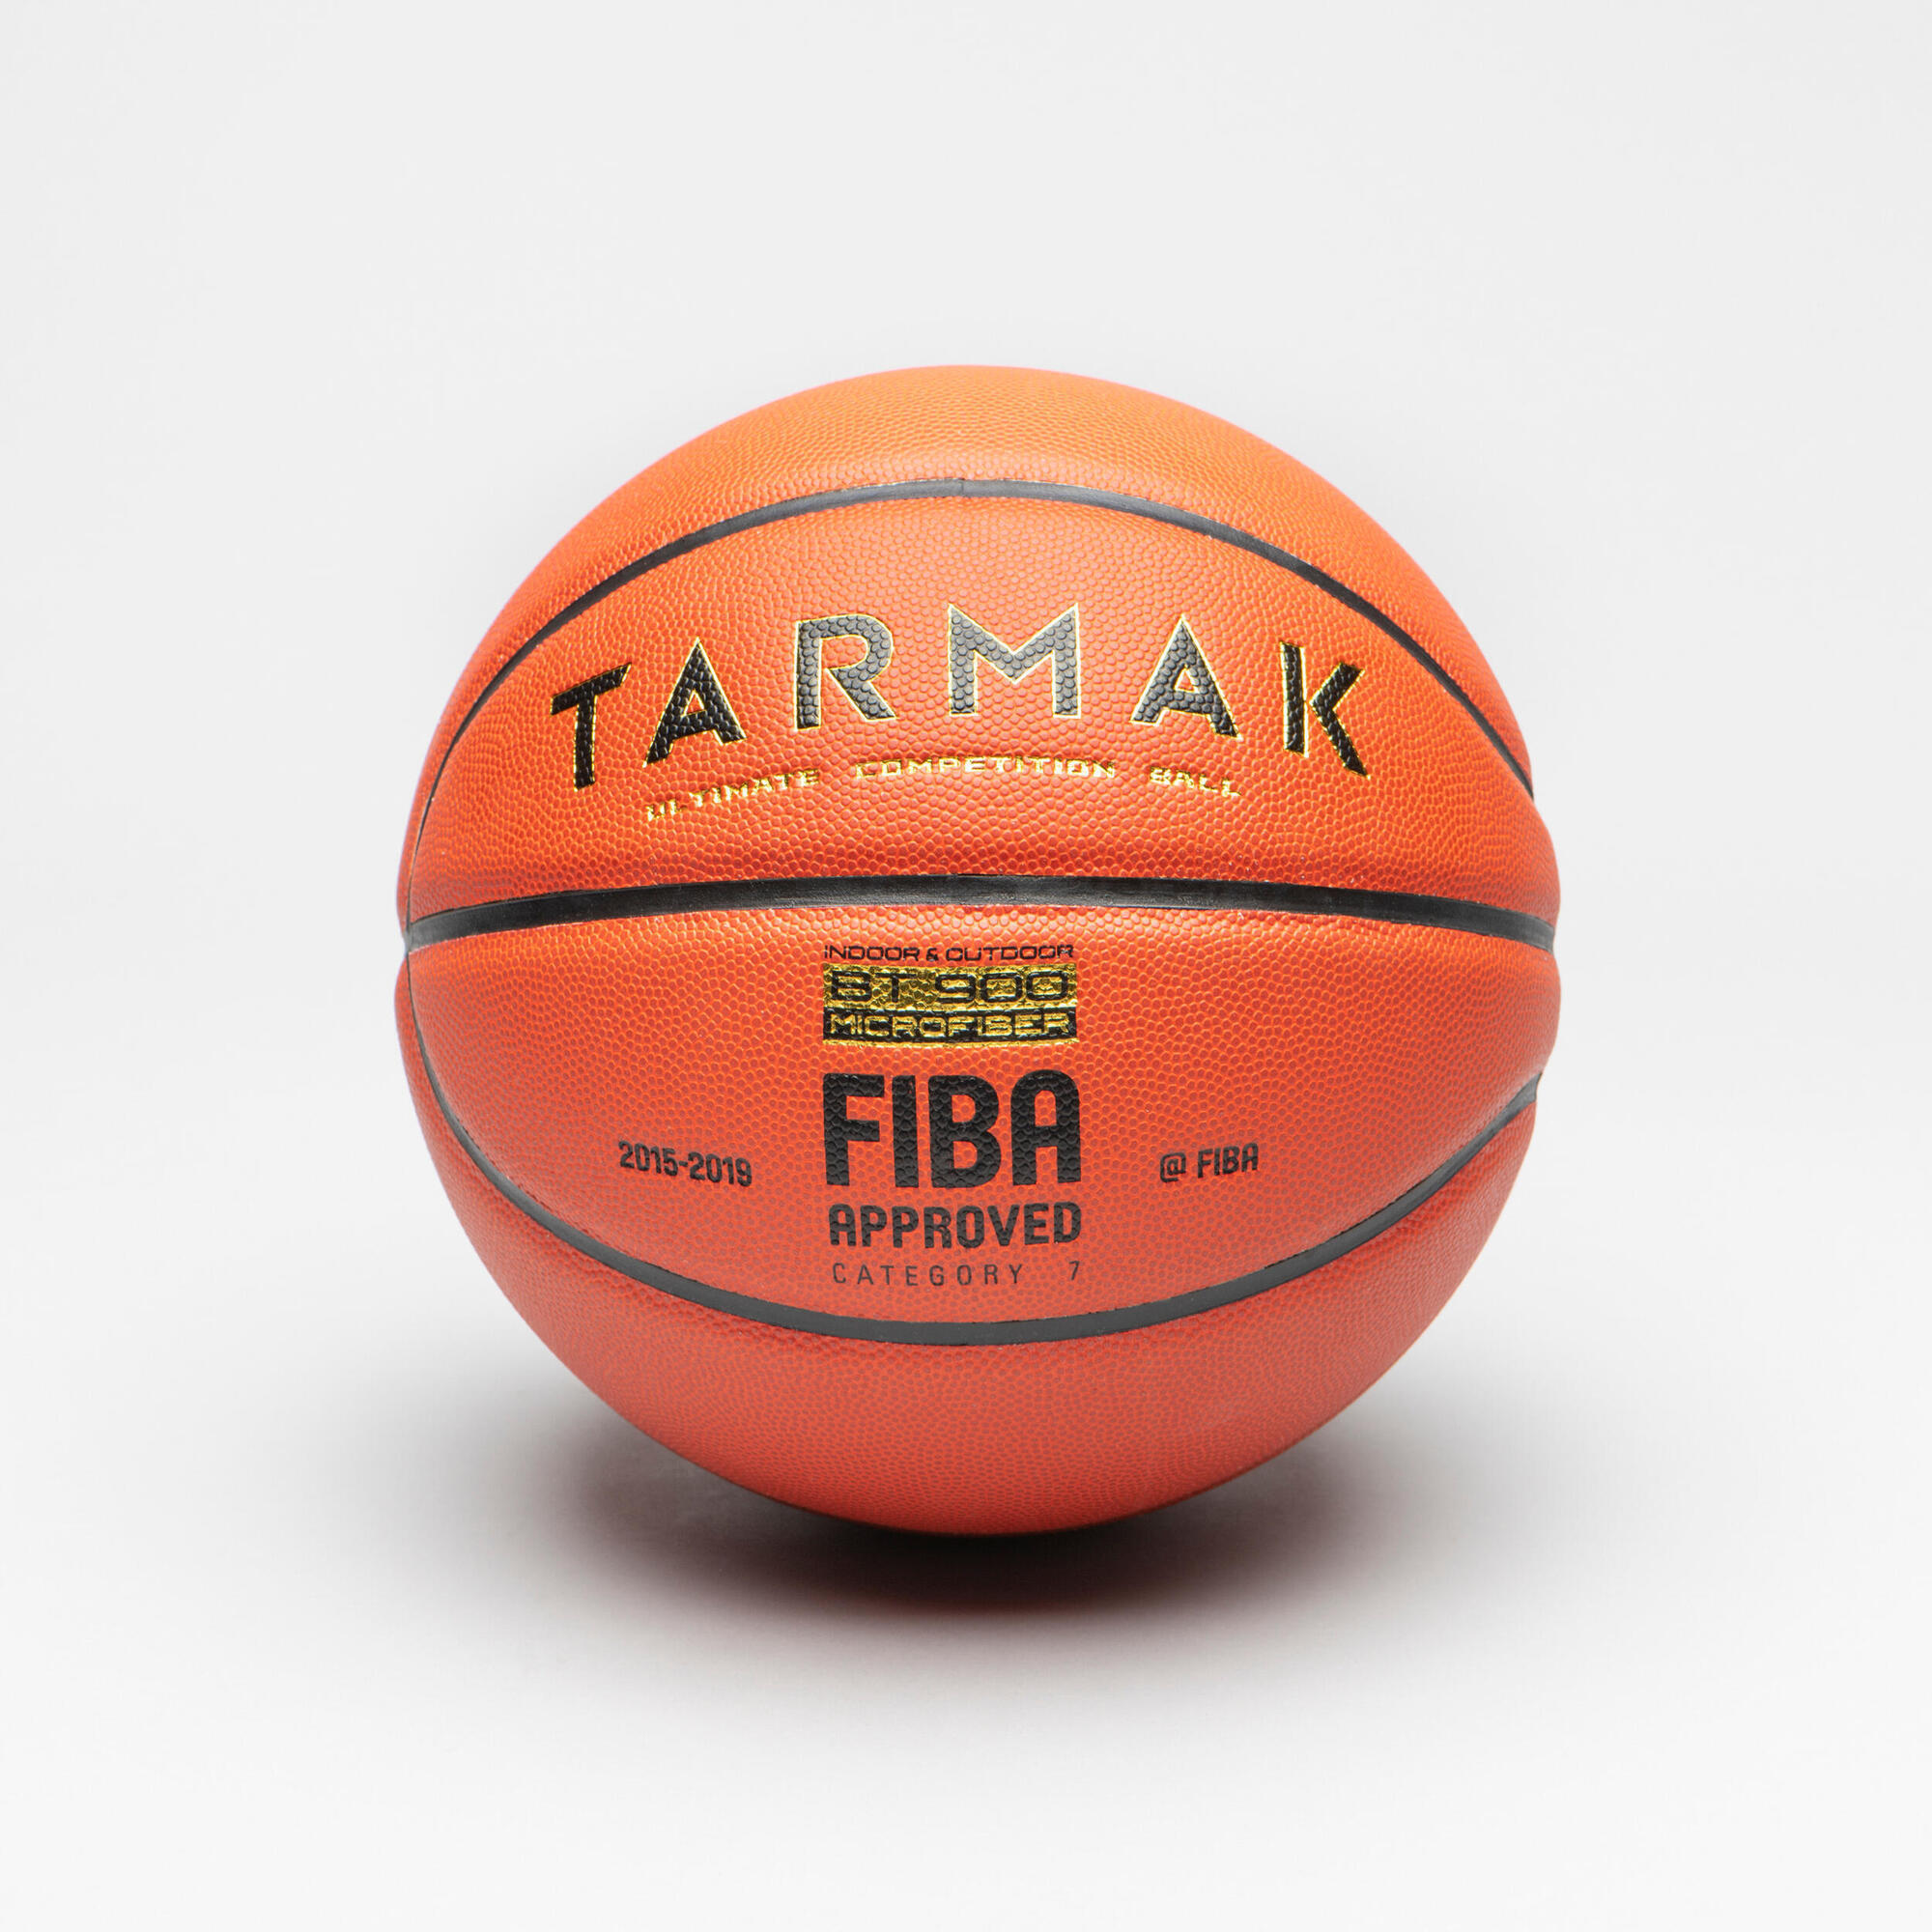 BT900 Size 7 BasketballFIBA-approved for boys and adults 1/7